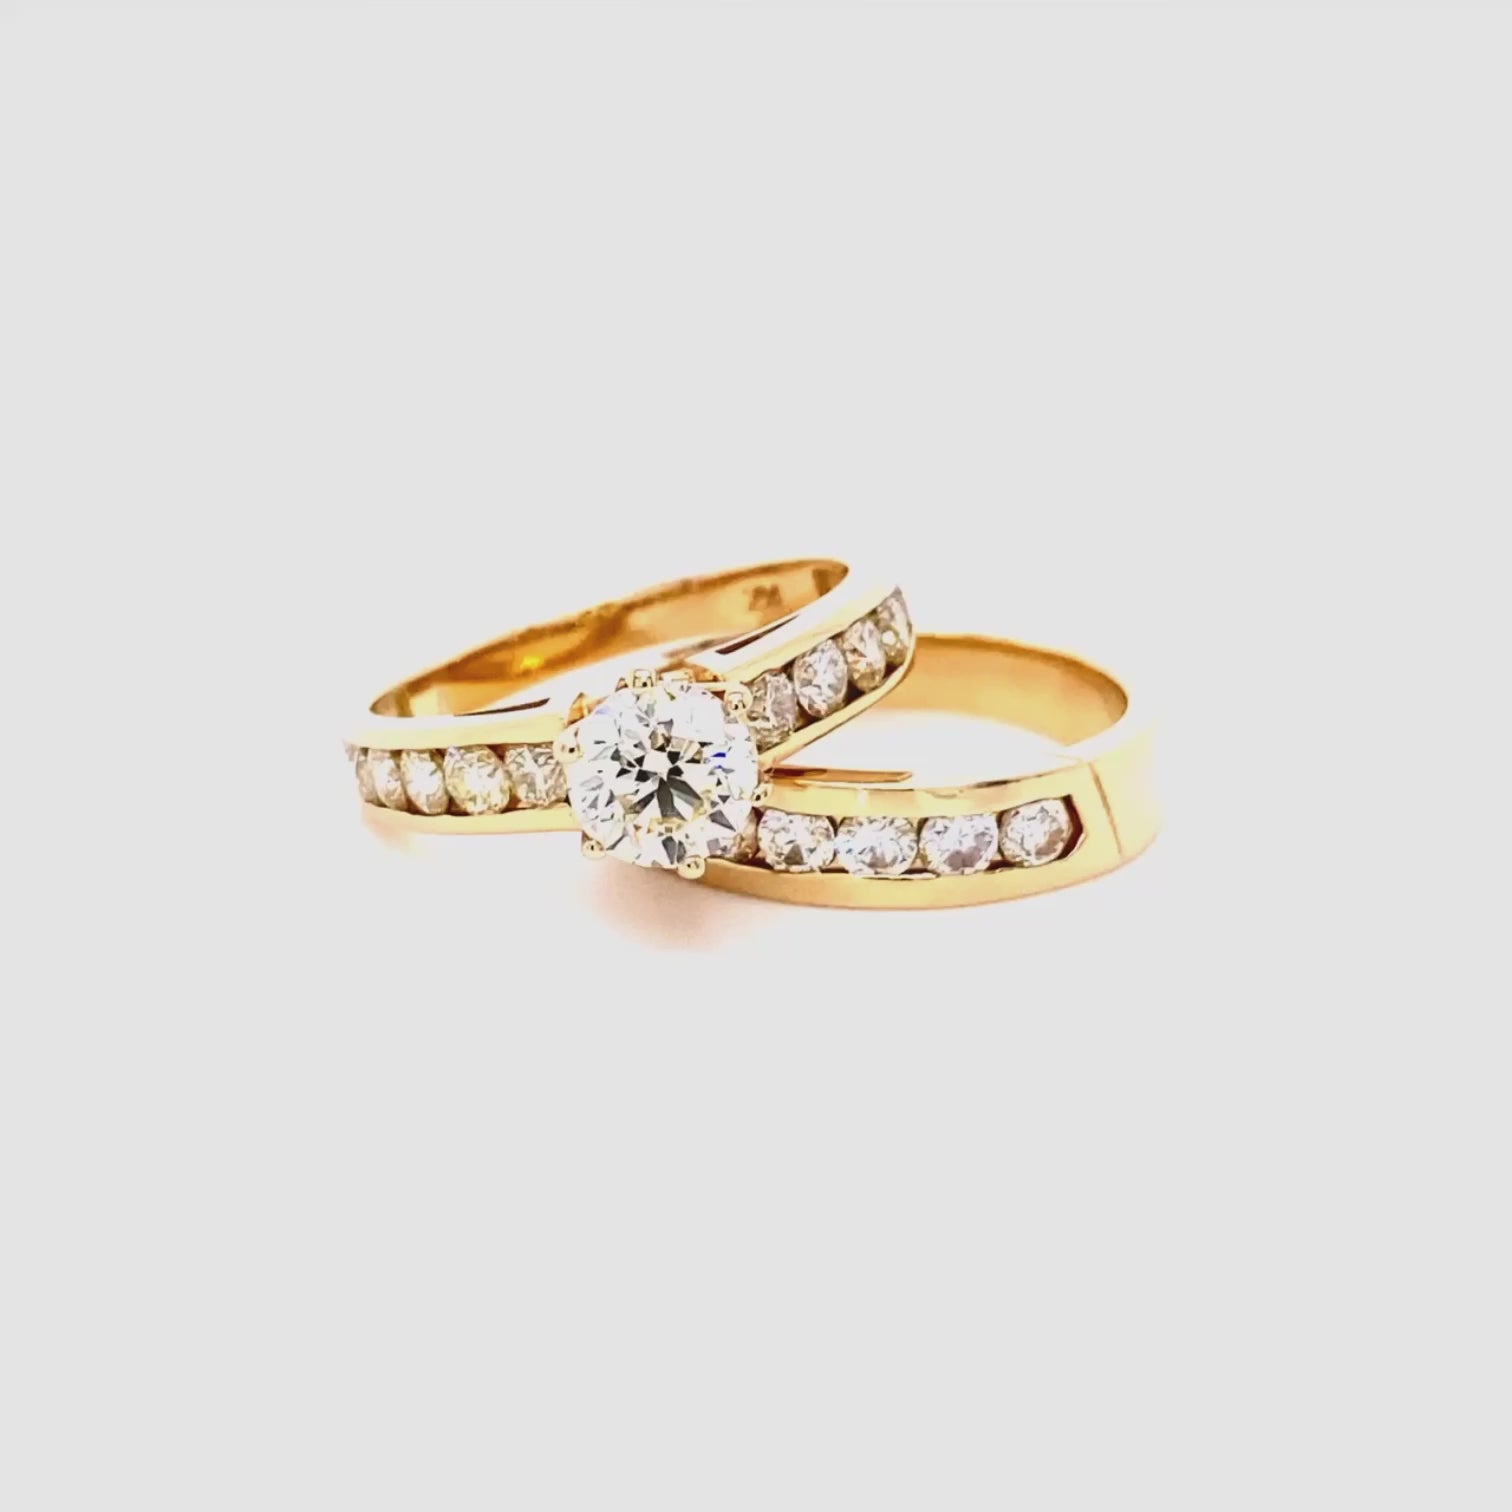 Authentic 2.00 CT Diamond Bridal Set in 14 KT Yellow Gold